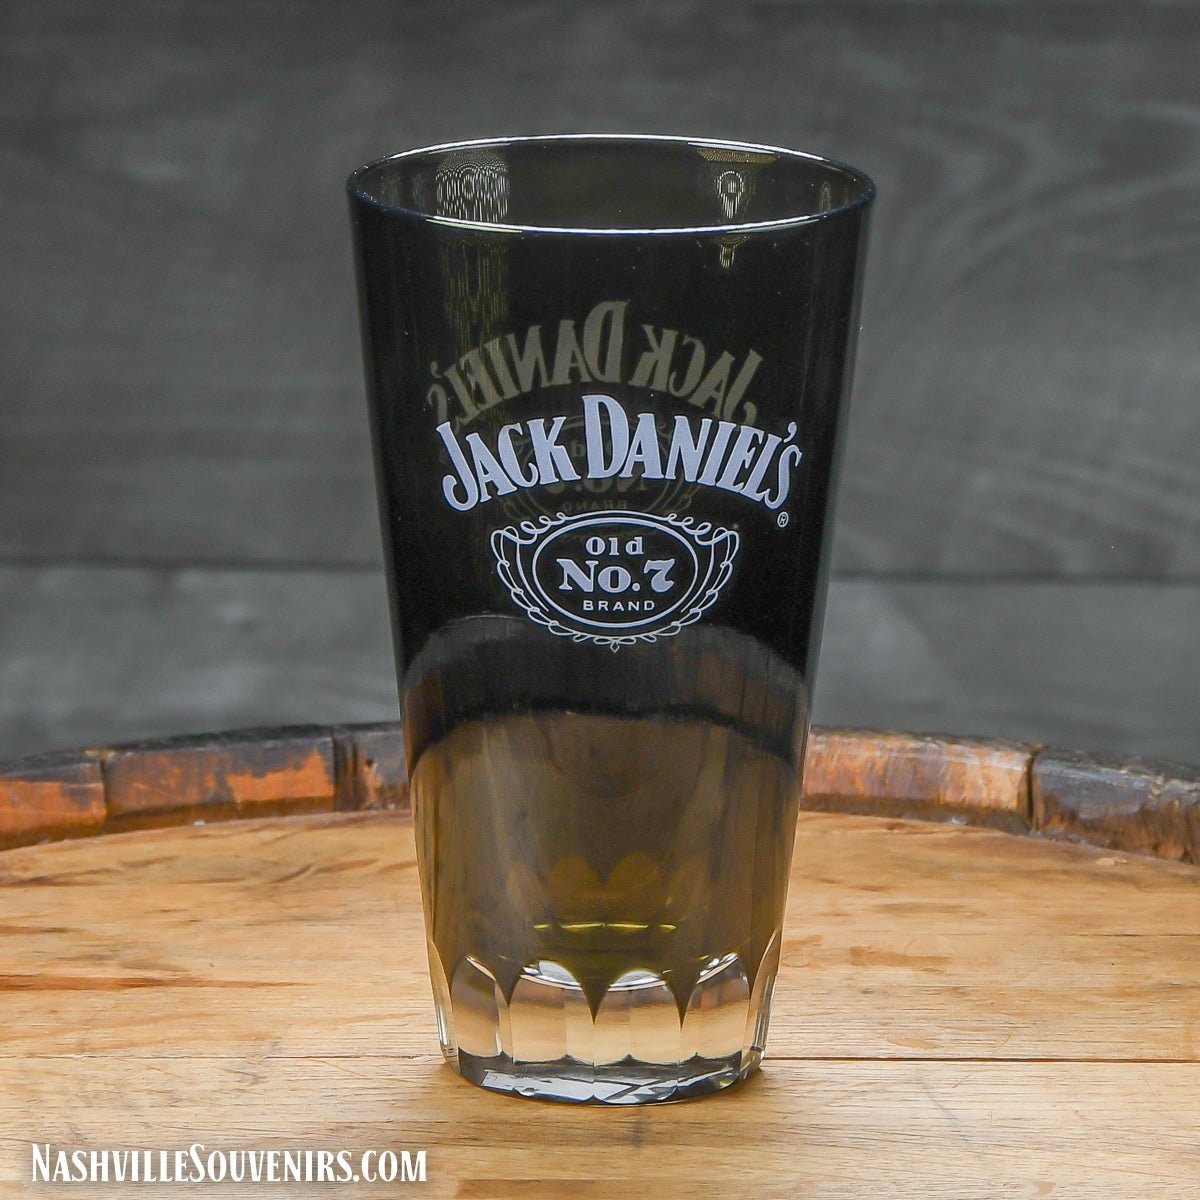 Officially licensed Jack Daniels Mixing Glass in black. Get yours today with FREE SHIPPING on all US orders over $75!